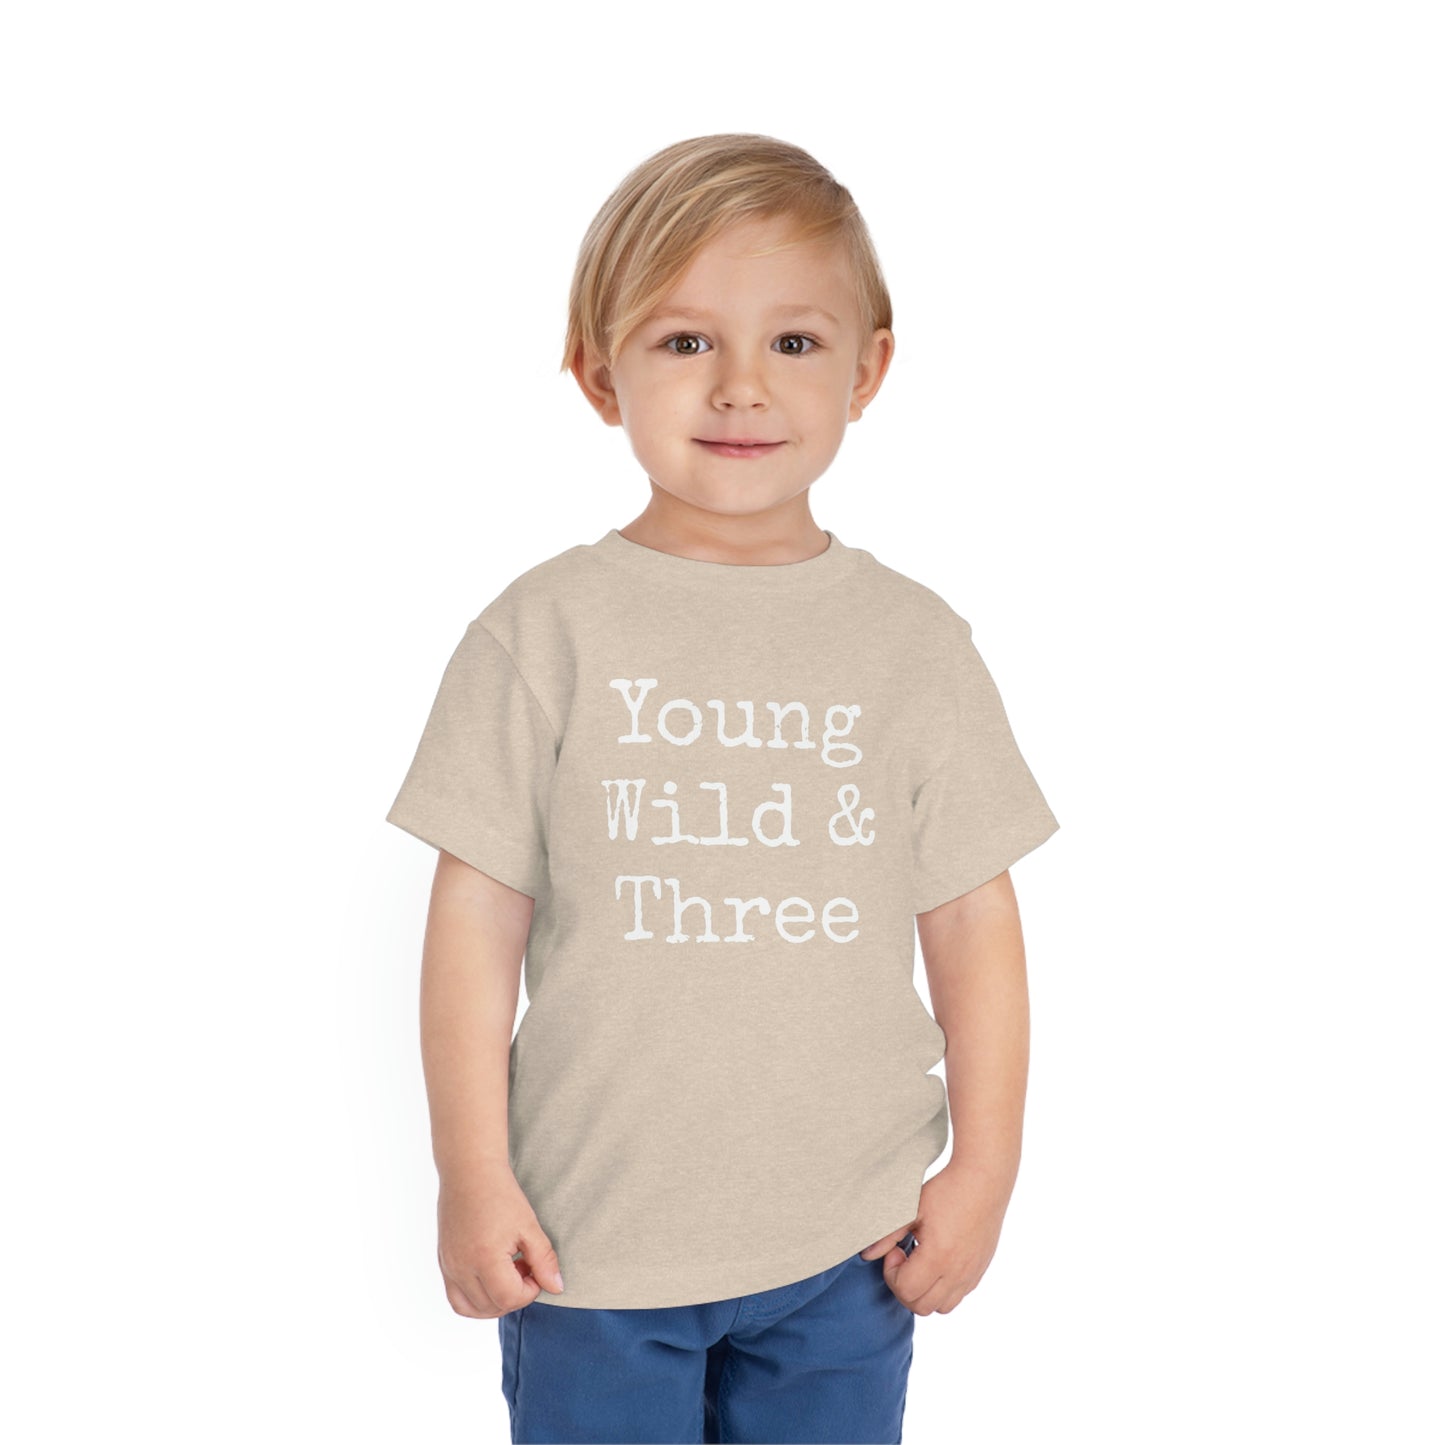 Young Wild & Three Logo Toddler Size 2T,3T,4T,5T Short Sleeve Tee